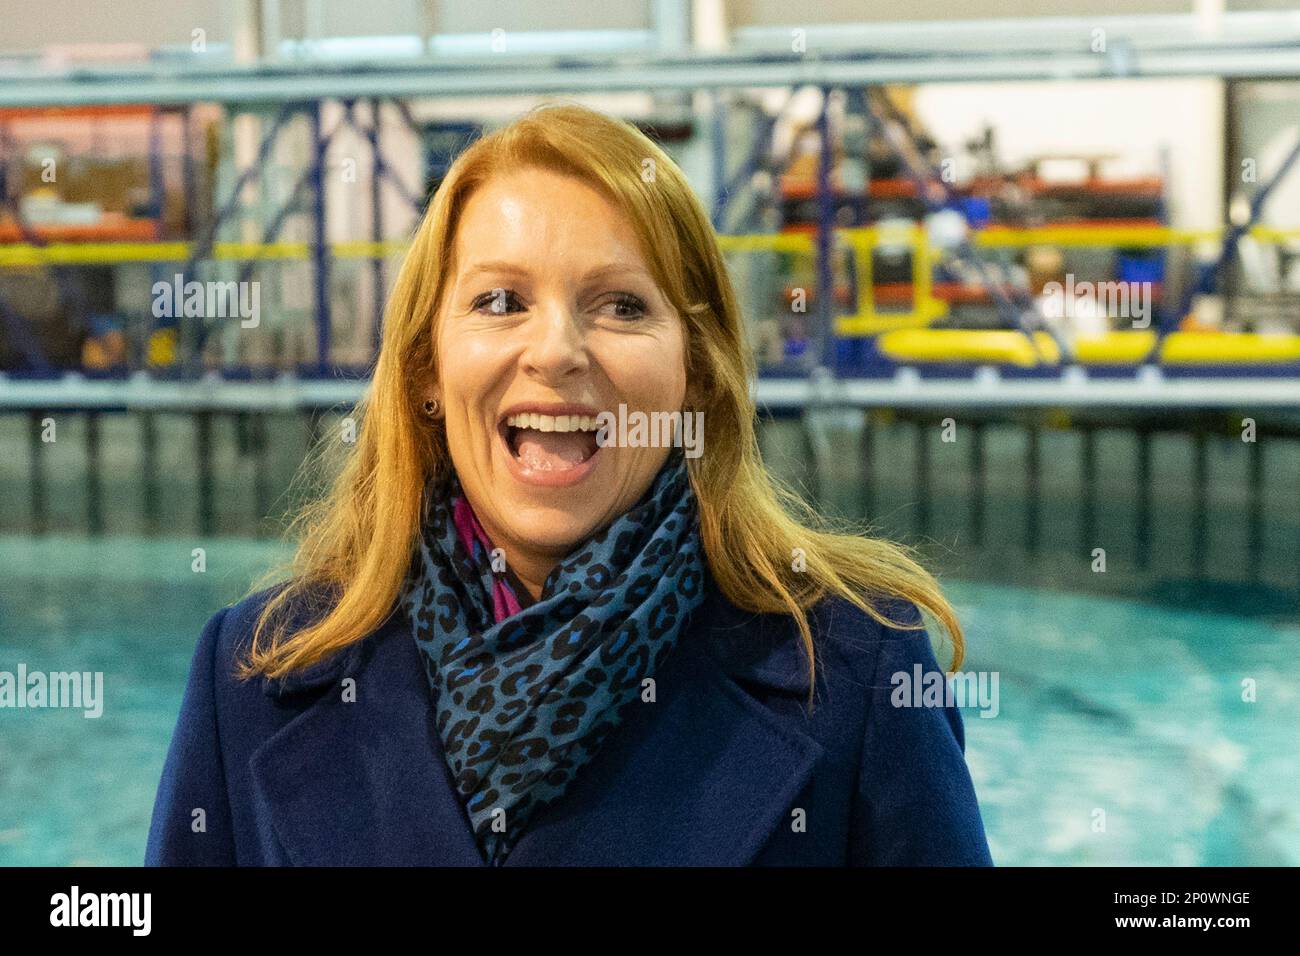 Edinburgh, Scotland, UK. 3 March 2023. Ash Regan visits FloWave Ocean Energy Research Facility at University of Edinburgh as the SNP leadership contest continues. Ash Regan is due to get tour of the facility followed by a demonstration of the ocean simulator. The FloWave facility is the first circular combined wave and current facility in the world, in which the team carry out research and development with the private sector and wider academia across offshore, wave and tidal energy.  Iain Masterton/Alamy Live News Stock Photo